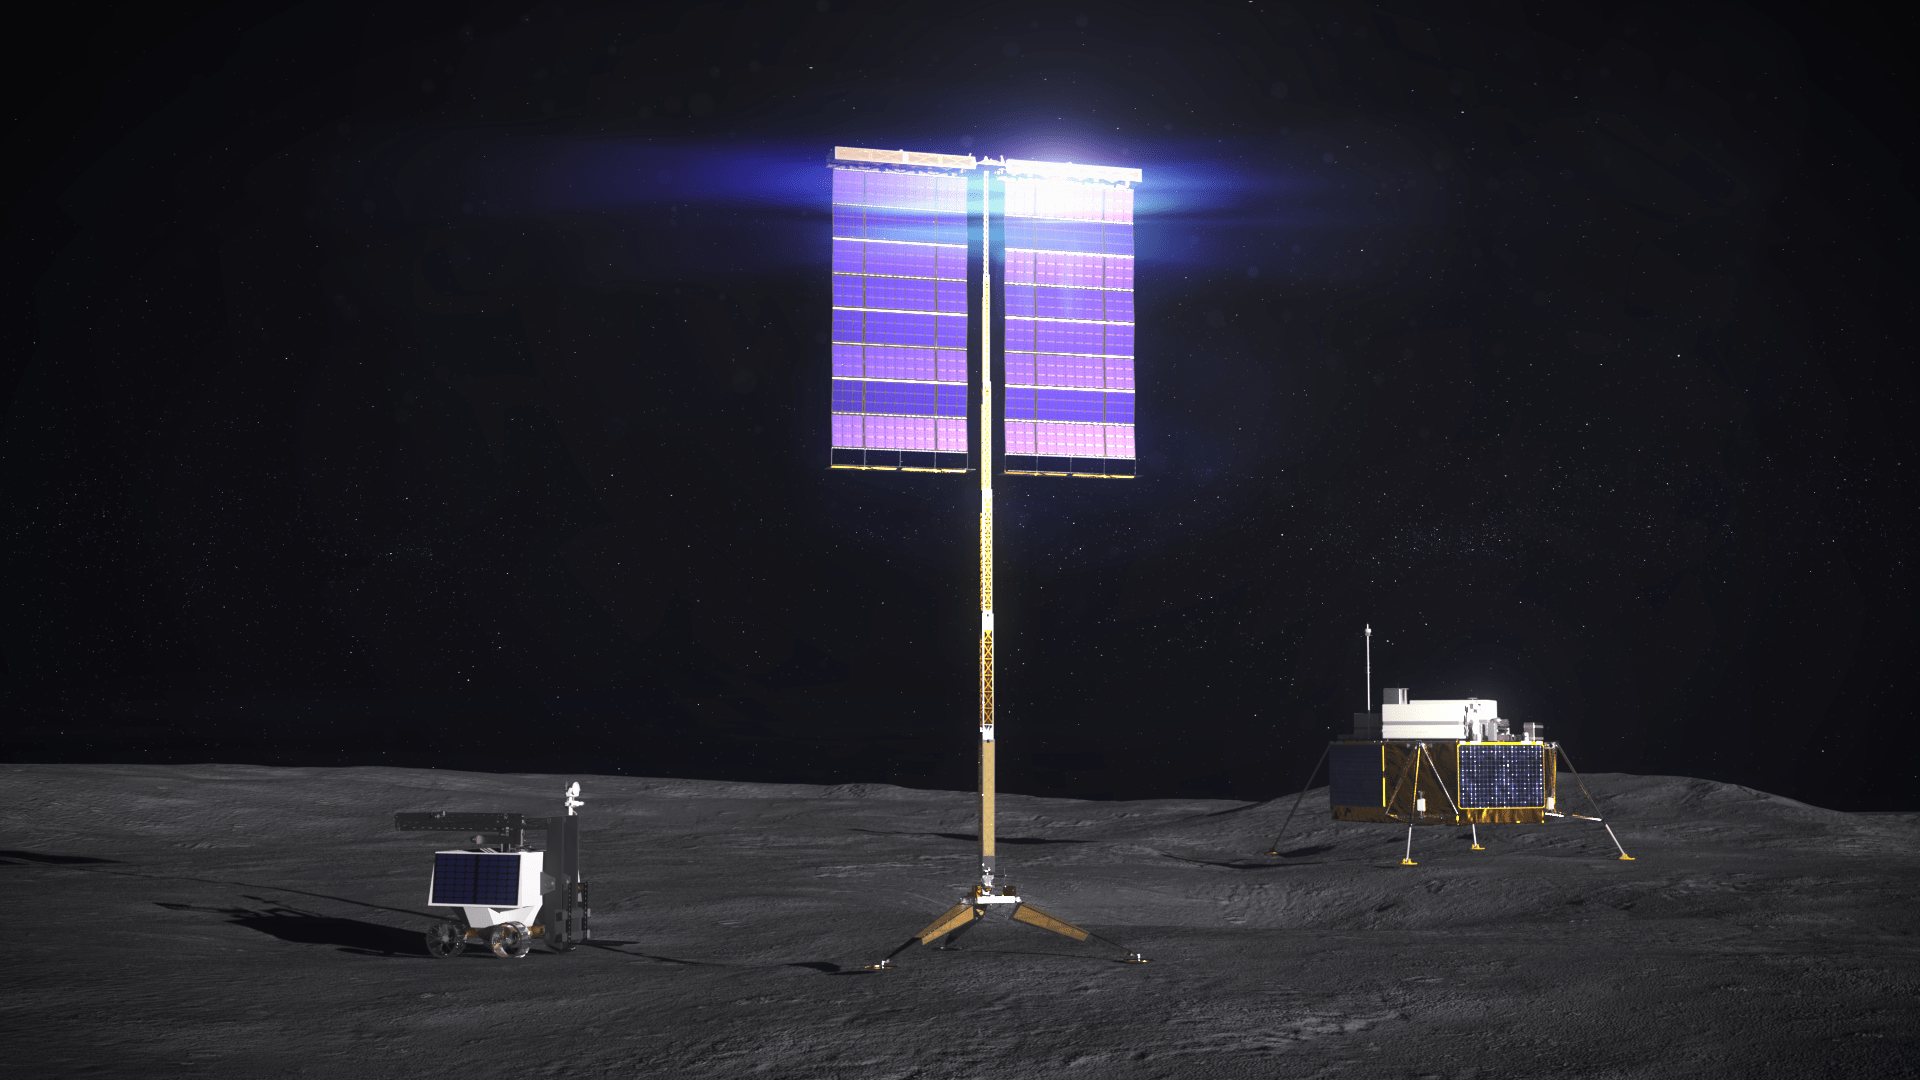 Artist concept of a vertical solar array being used as a power source on the surface of the Moon with robotics positioned nearby.